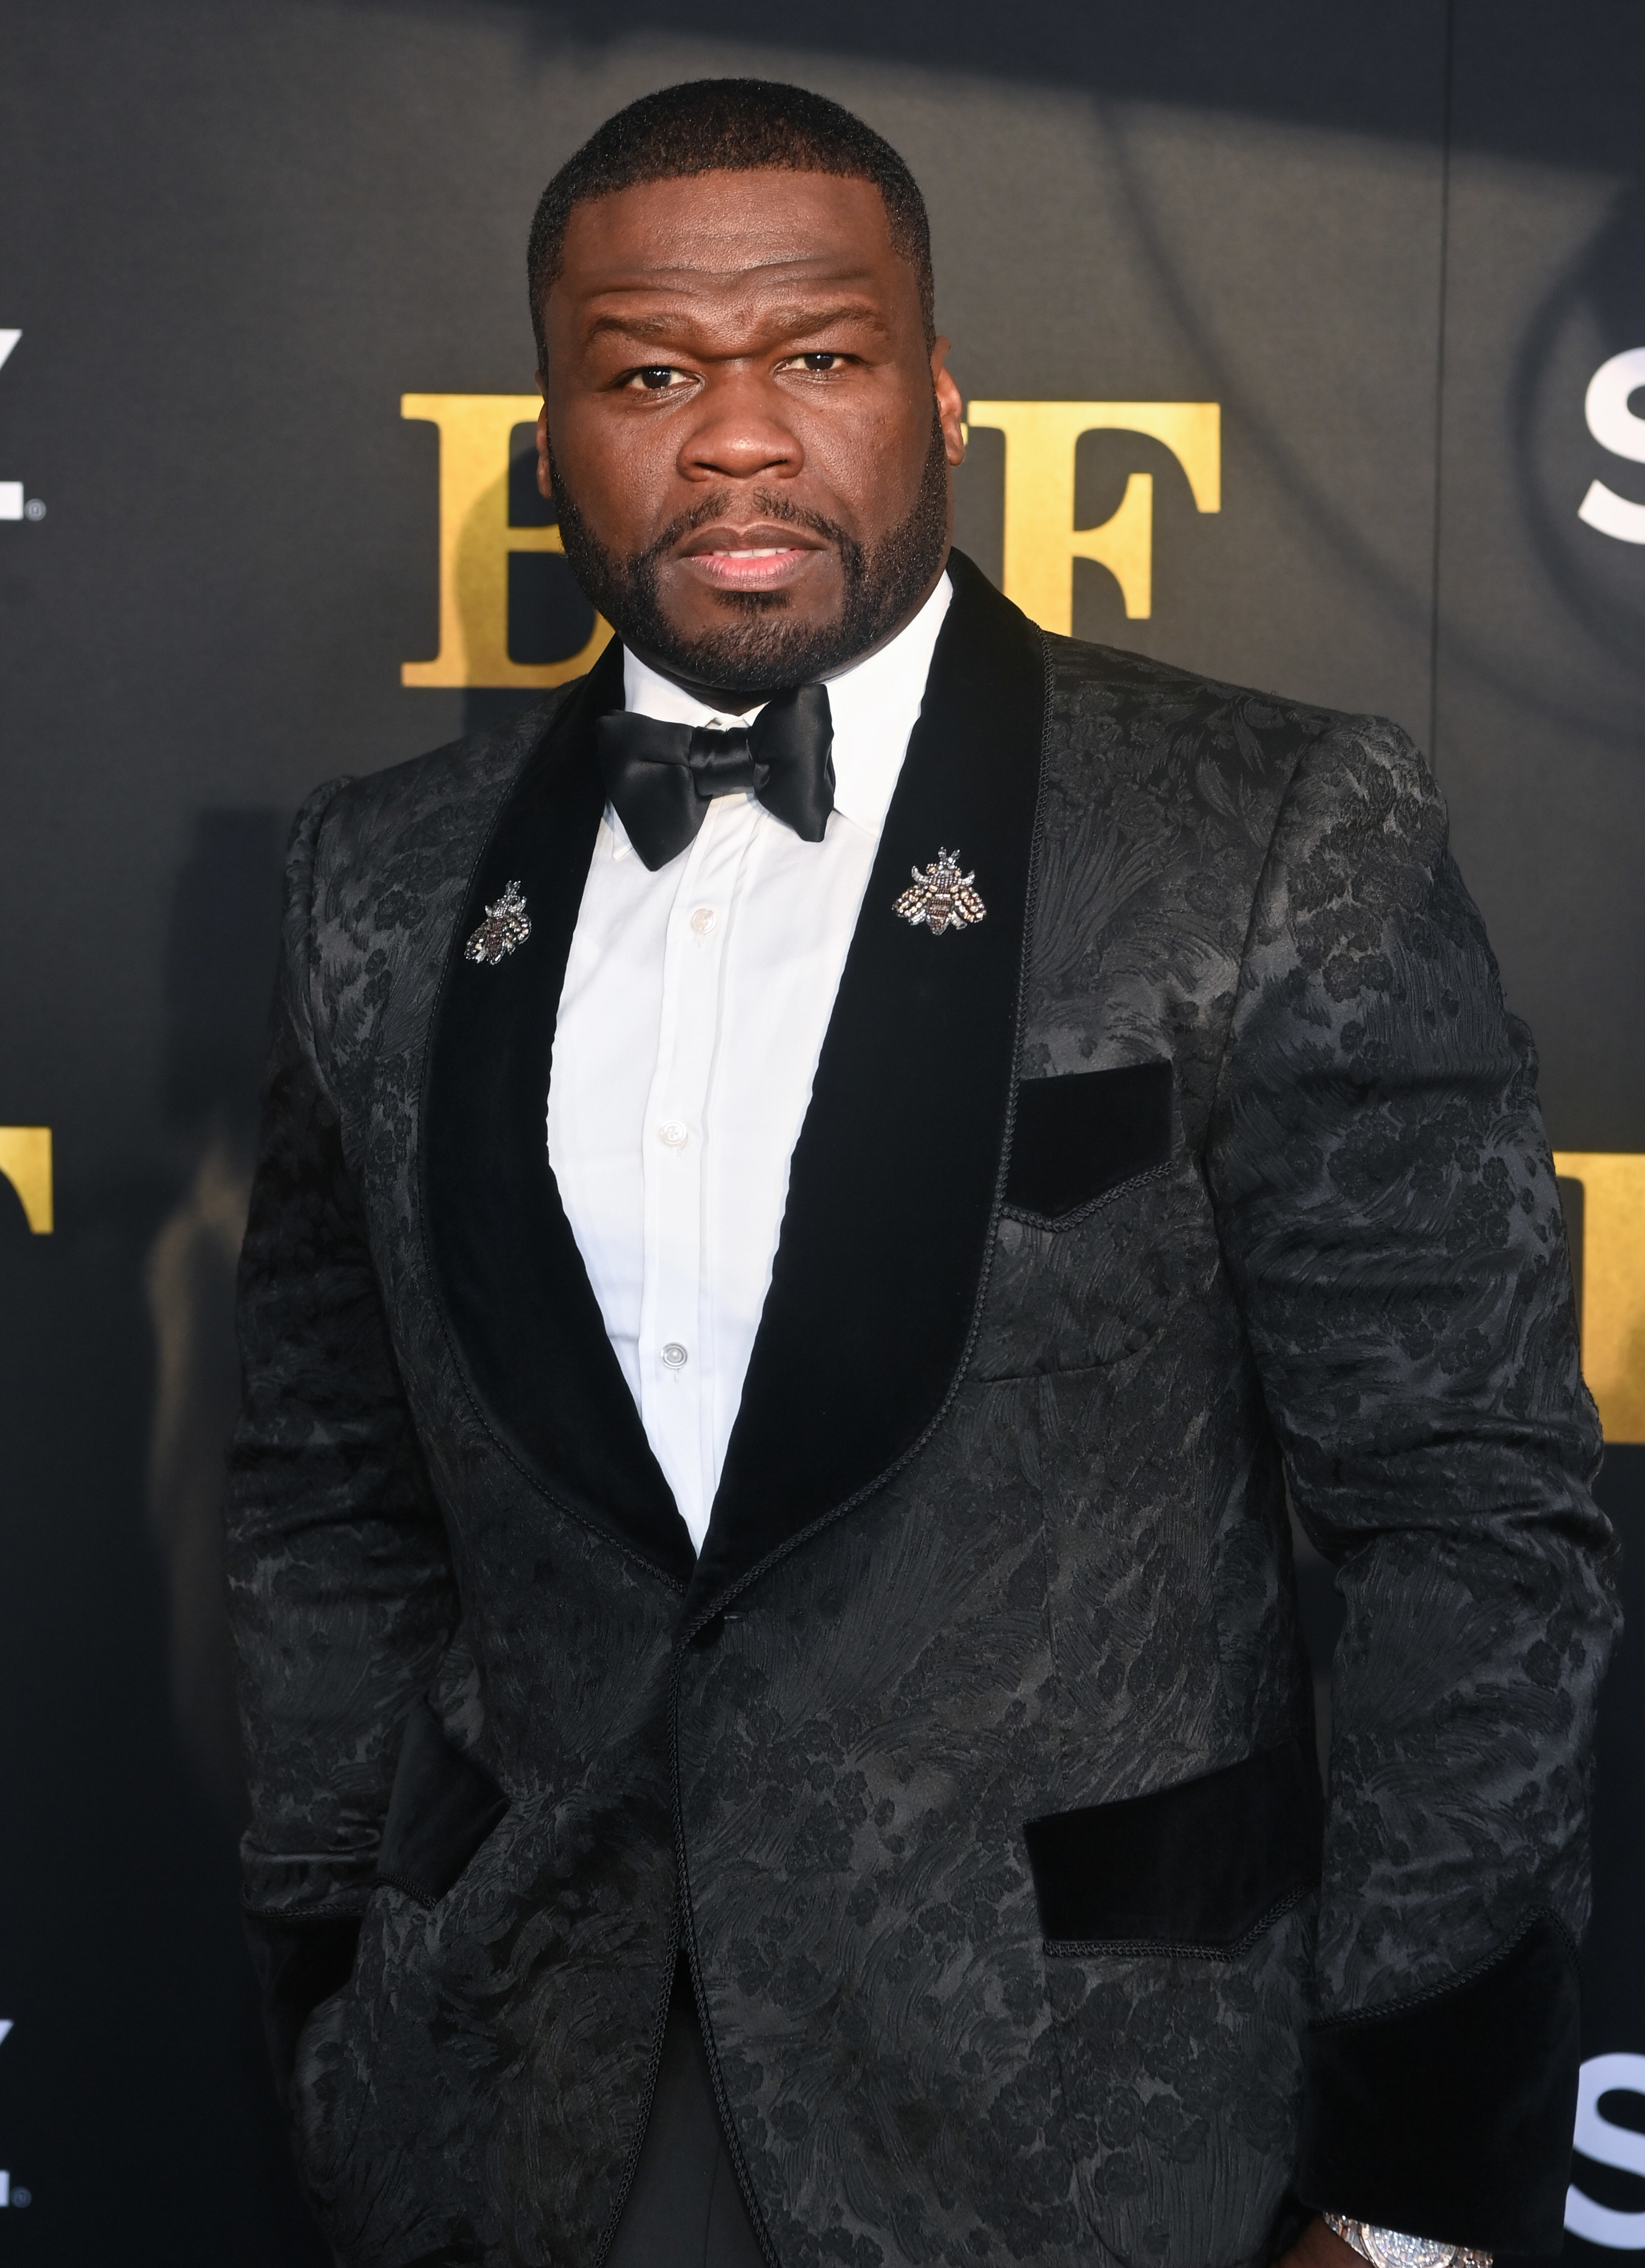 50 cent at an event in 2021